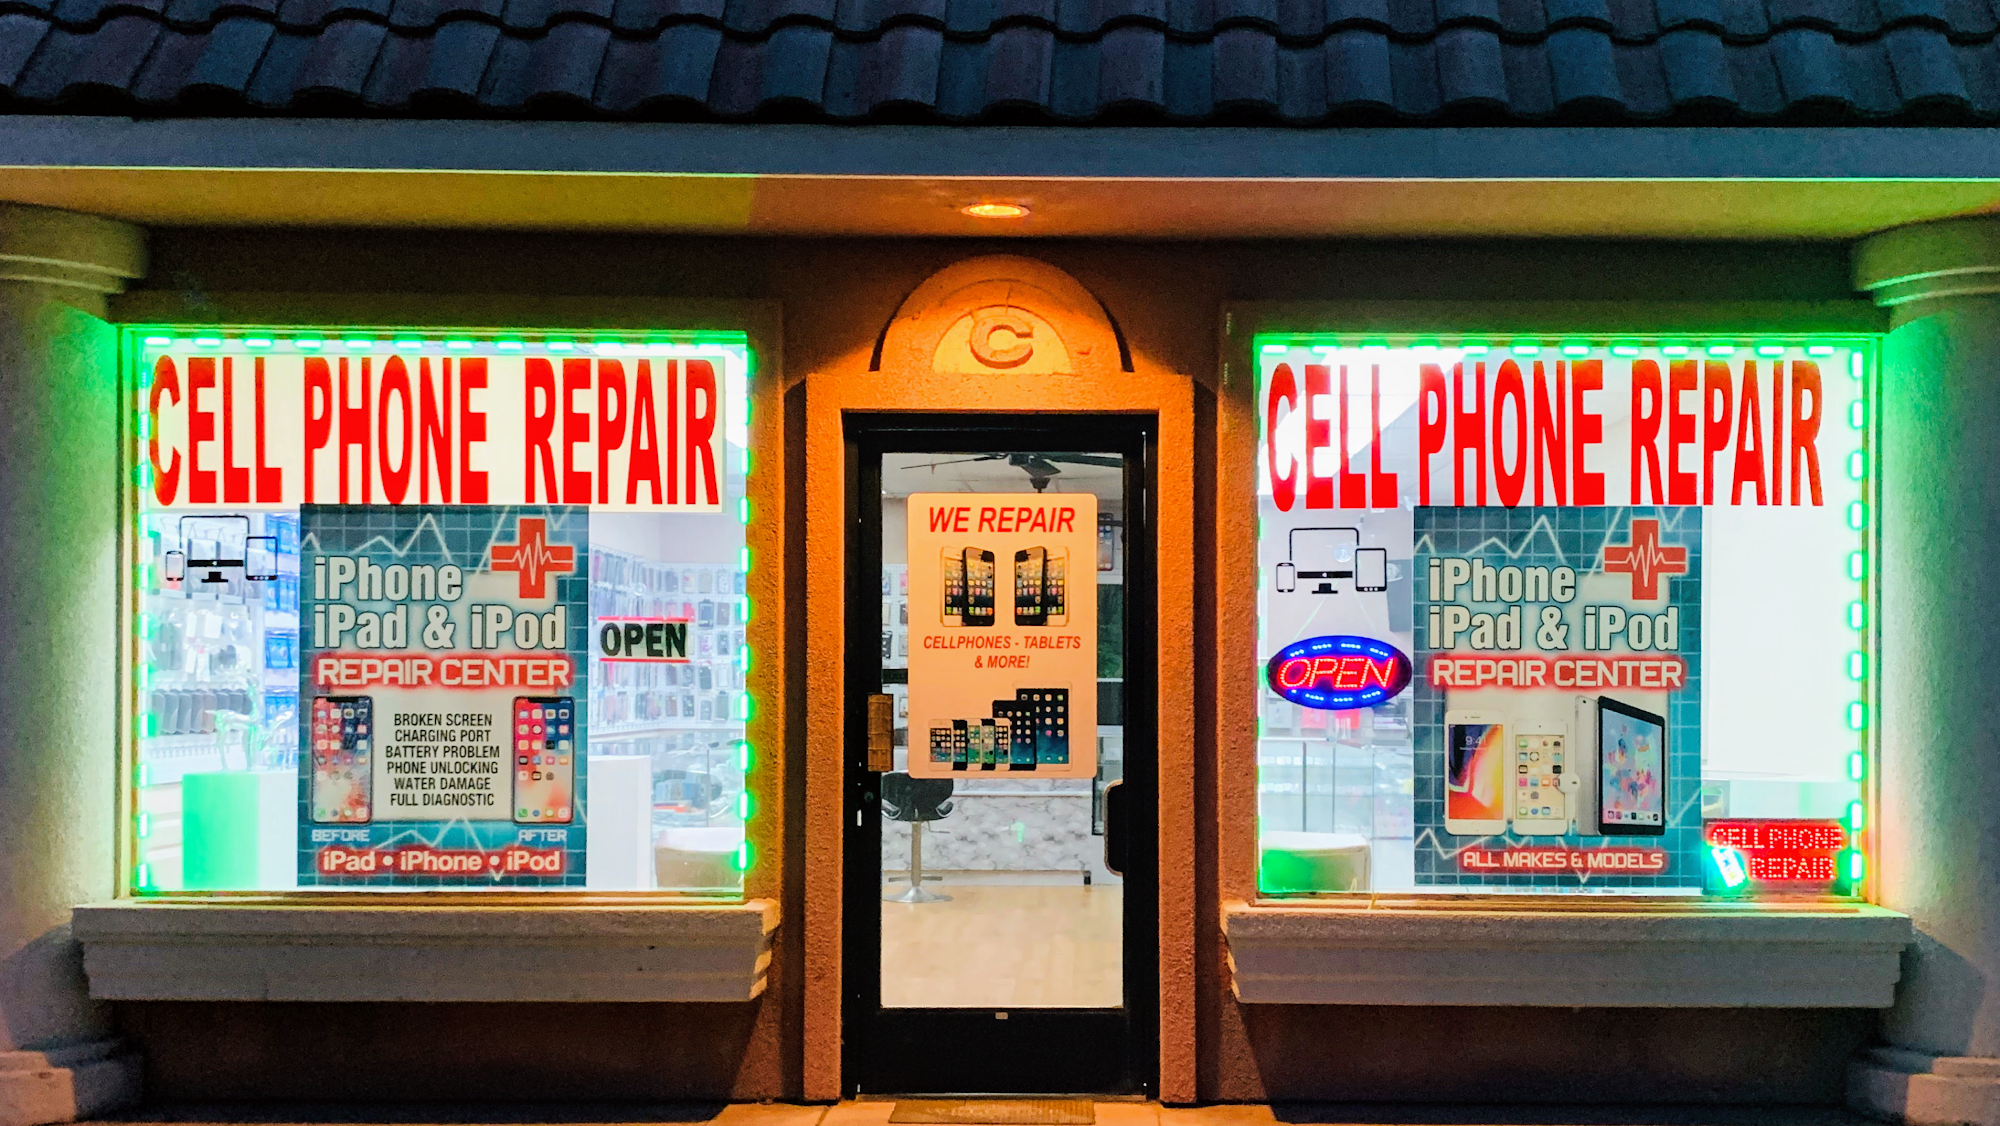 UP&FIX Cell Phone Repair